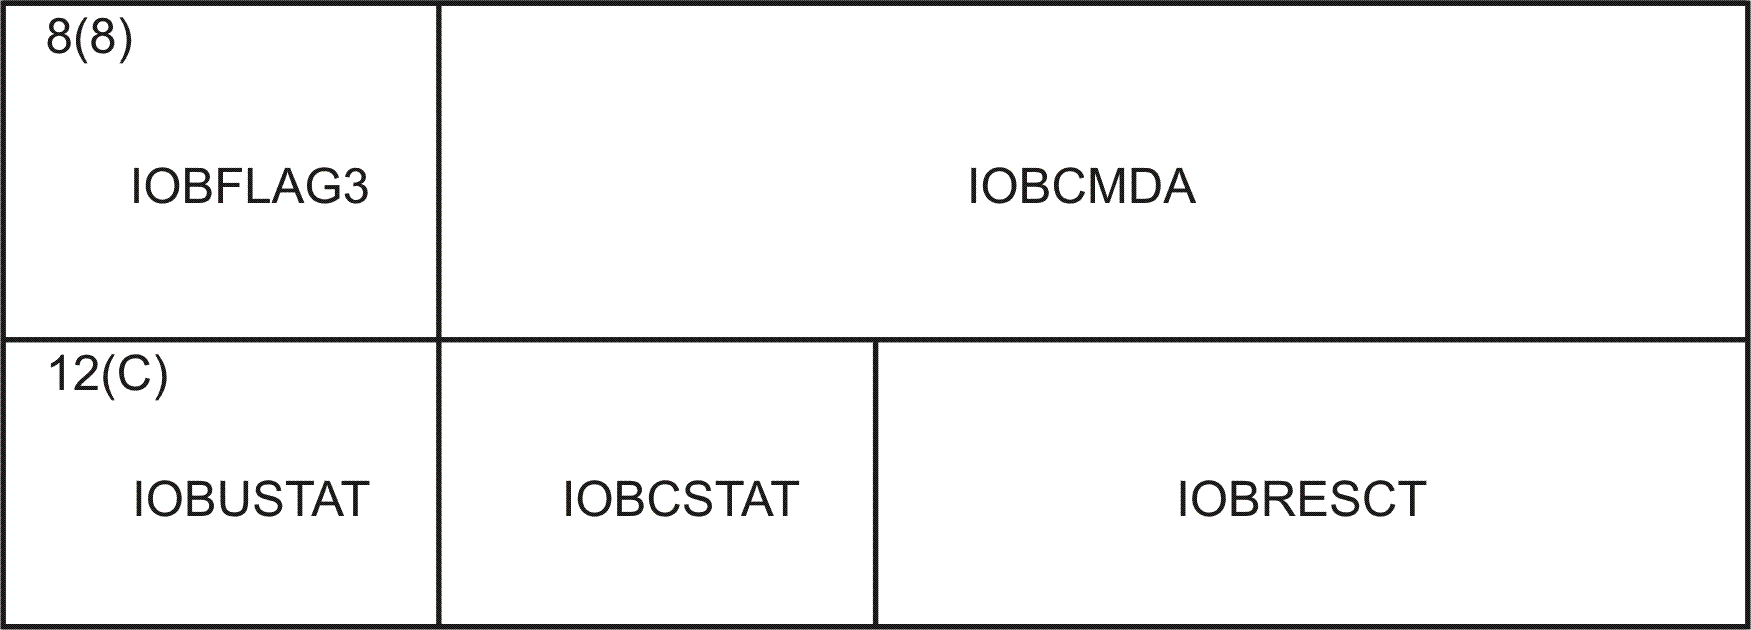 IOBFLAG3 and IOBCSW fields for format 0 channel program